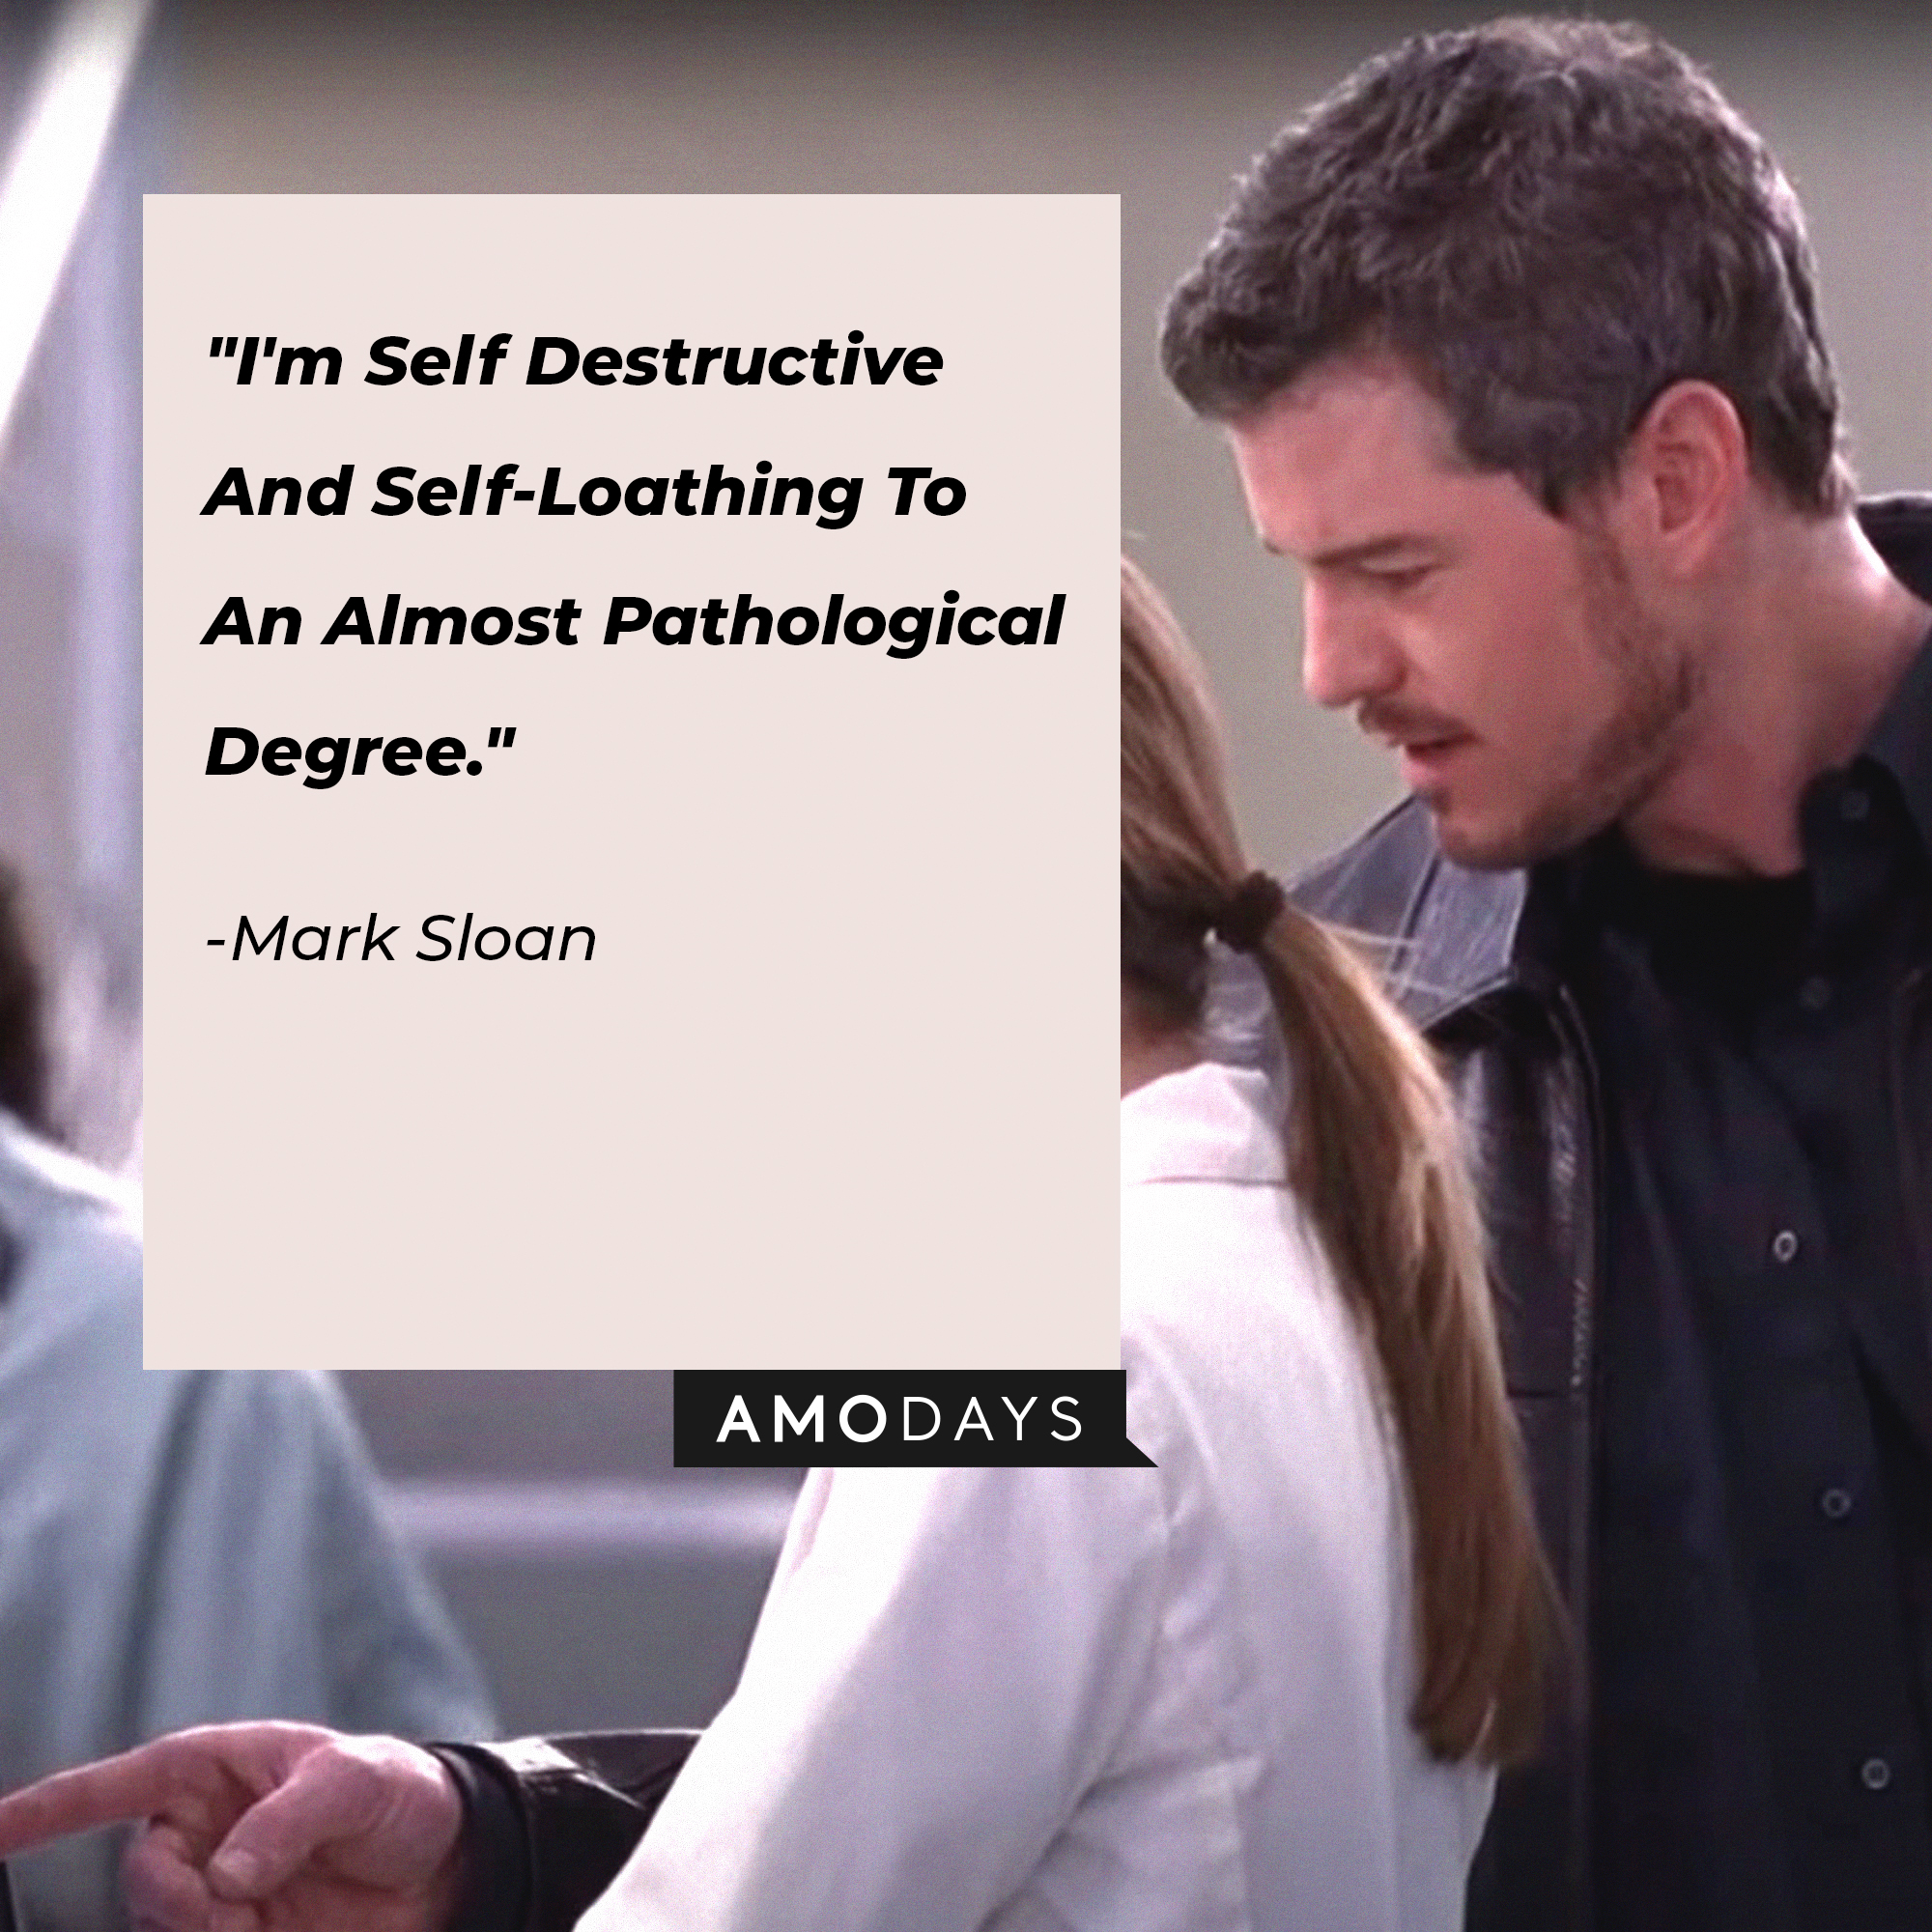 Mark Sloan's quote: "I'm Self Destructive And Self-Loathing To An Almost Pathological Degree." | Image: AmoDays